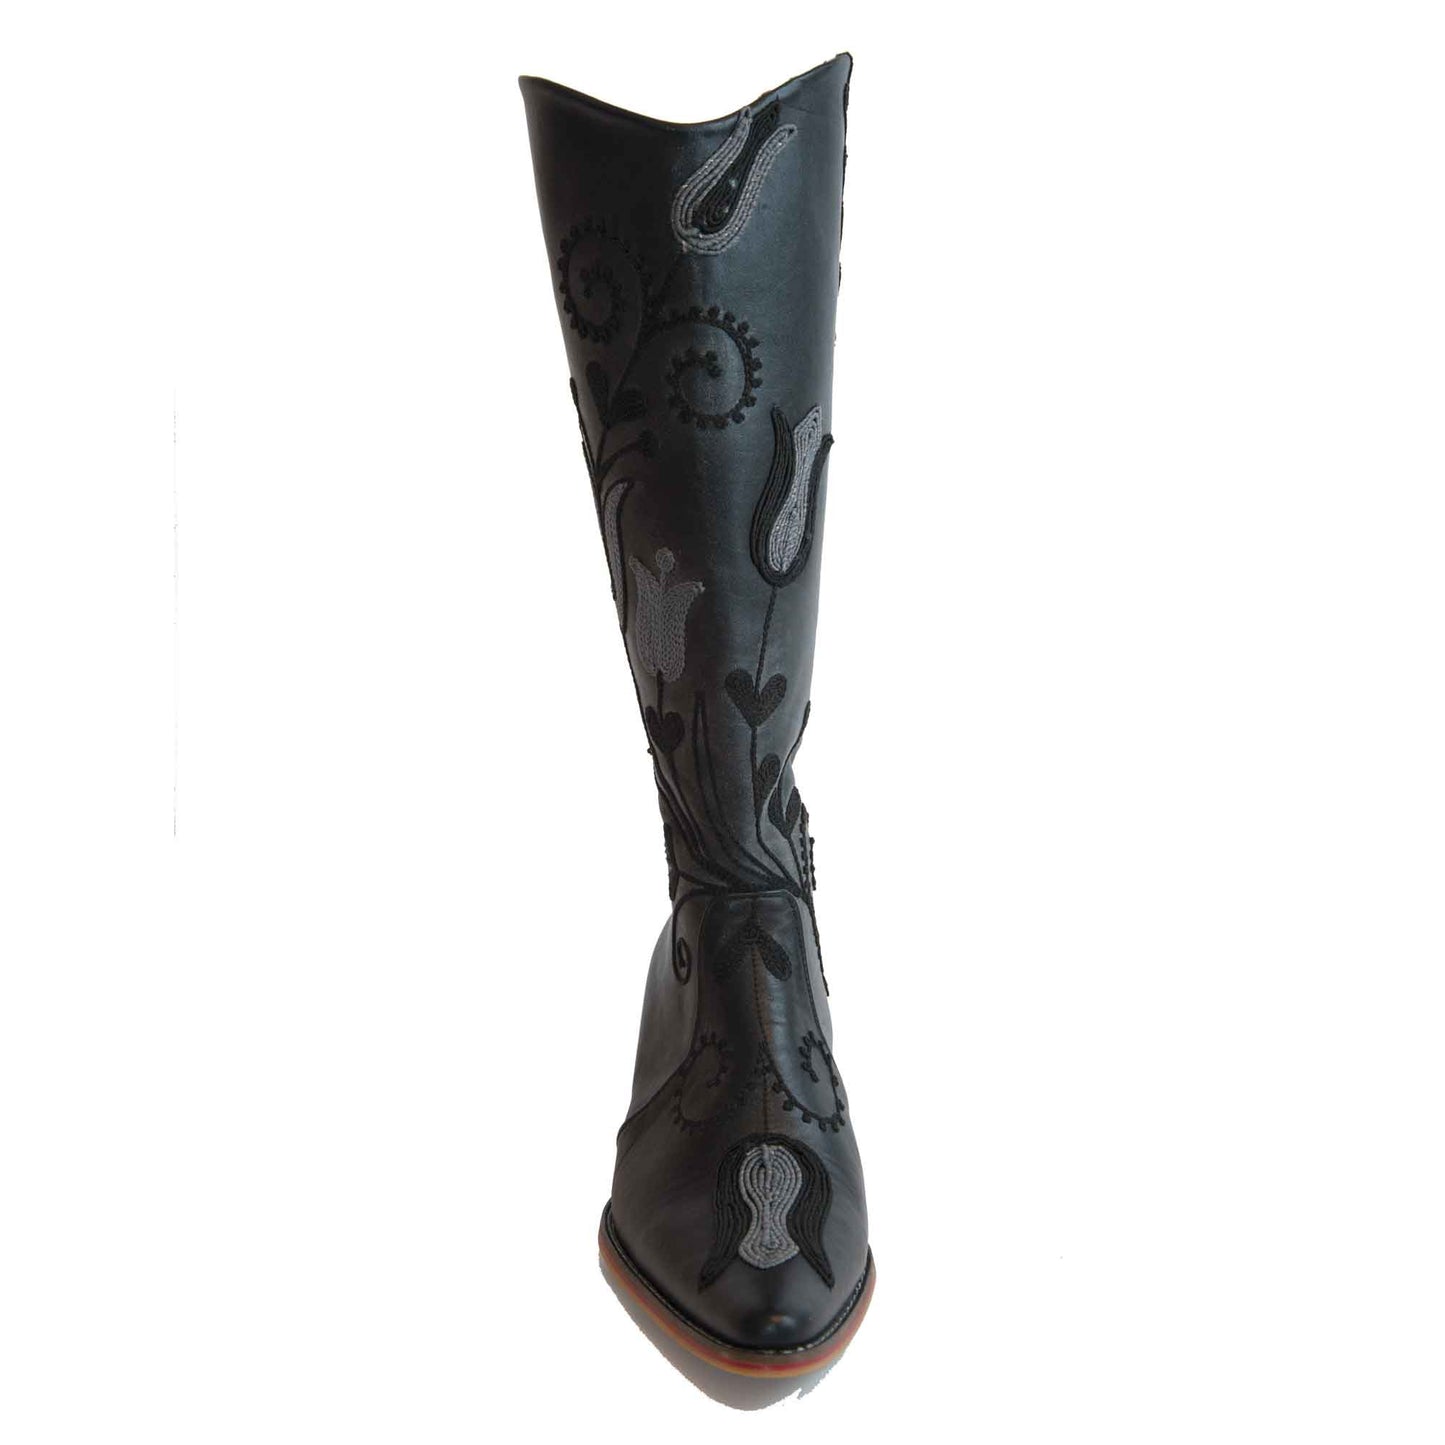 Cheyenne Tall Embroidered Leather 3